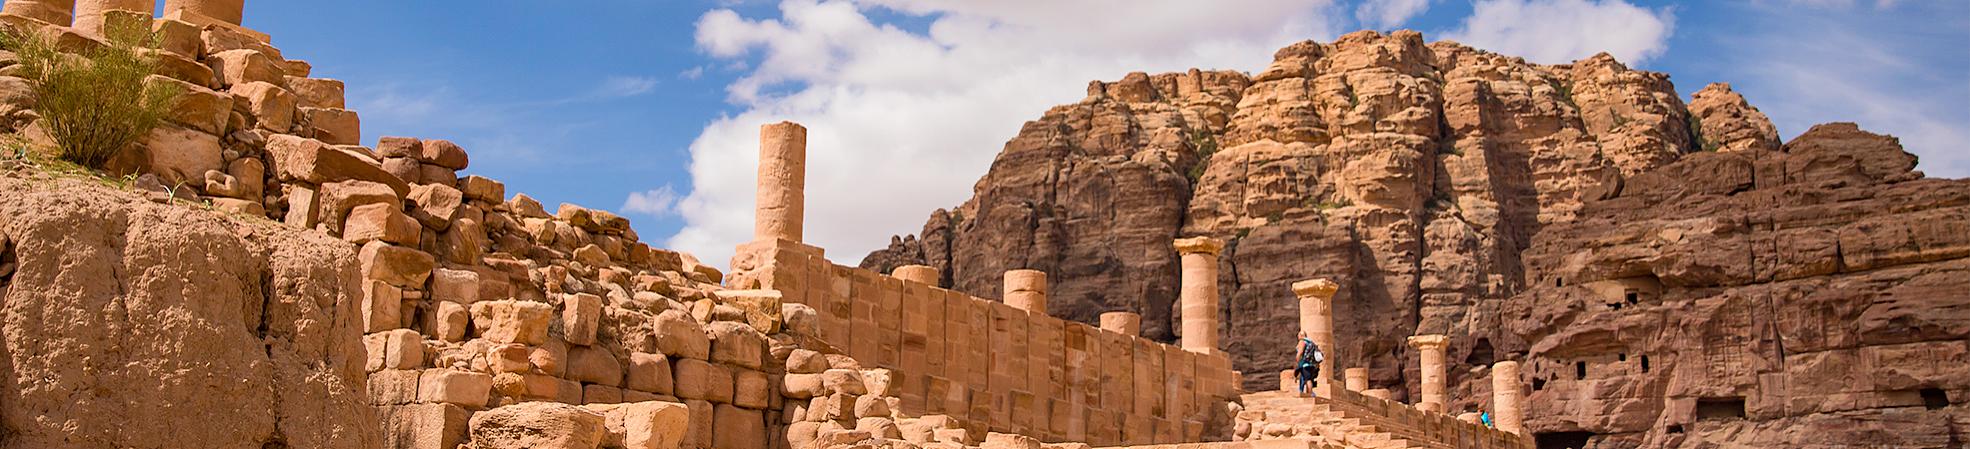 10 Top-Rated Tourisr Attractions to Visit in Jordan